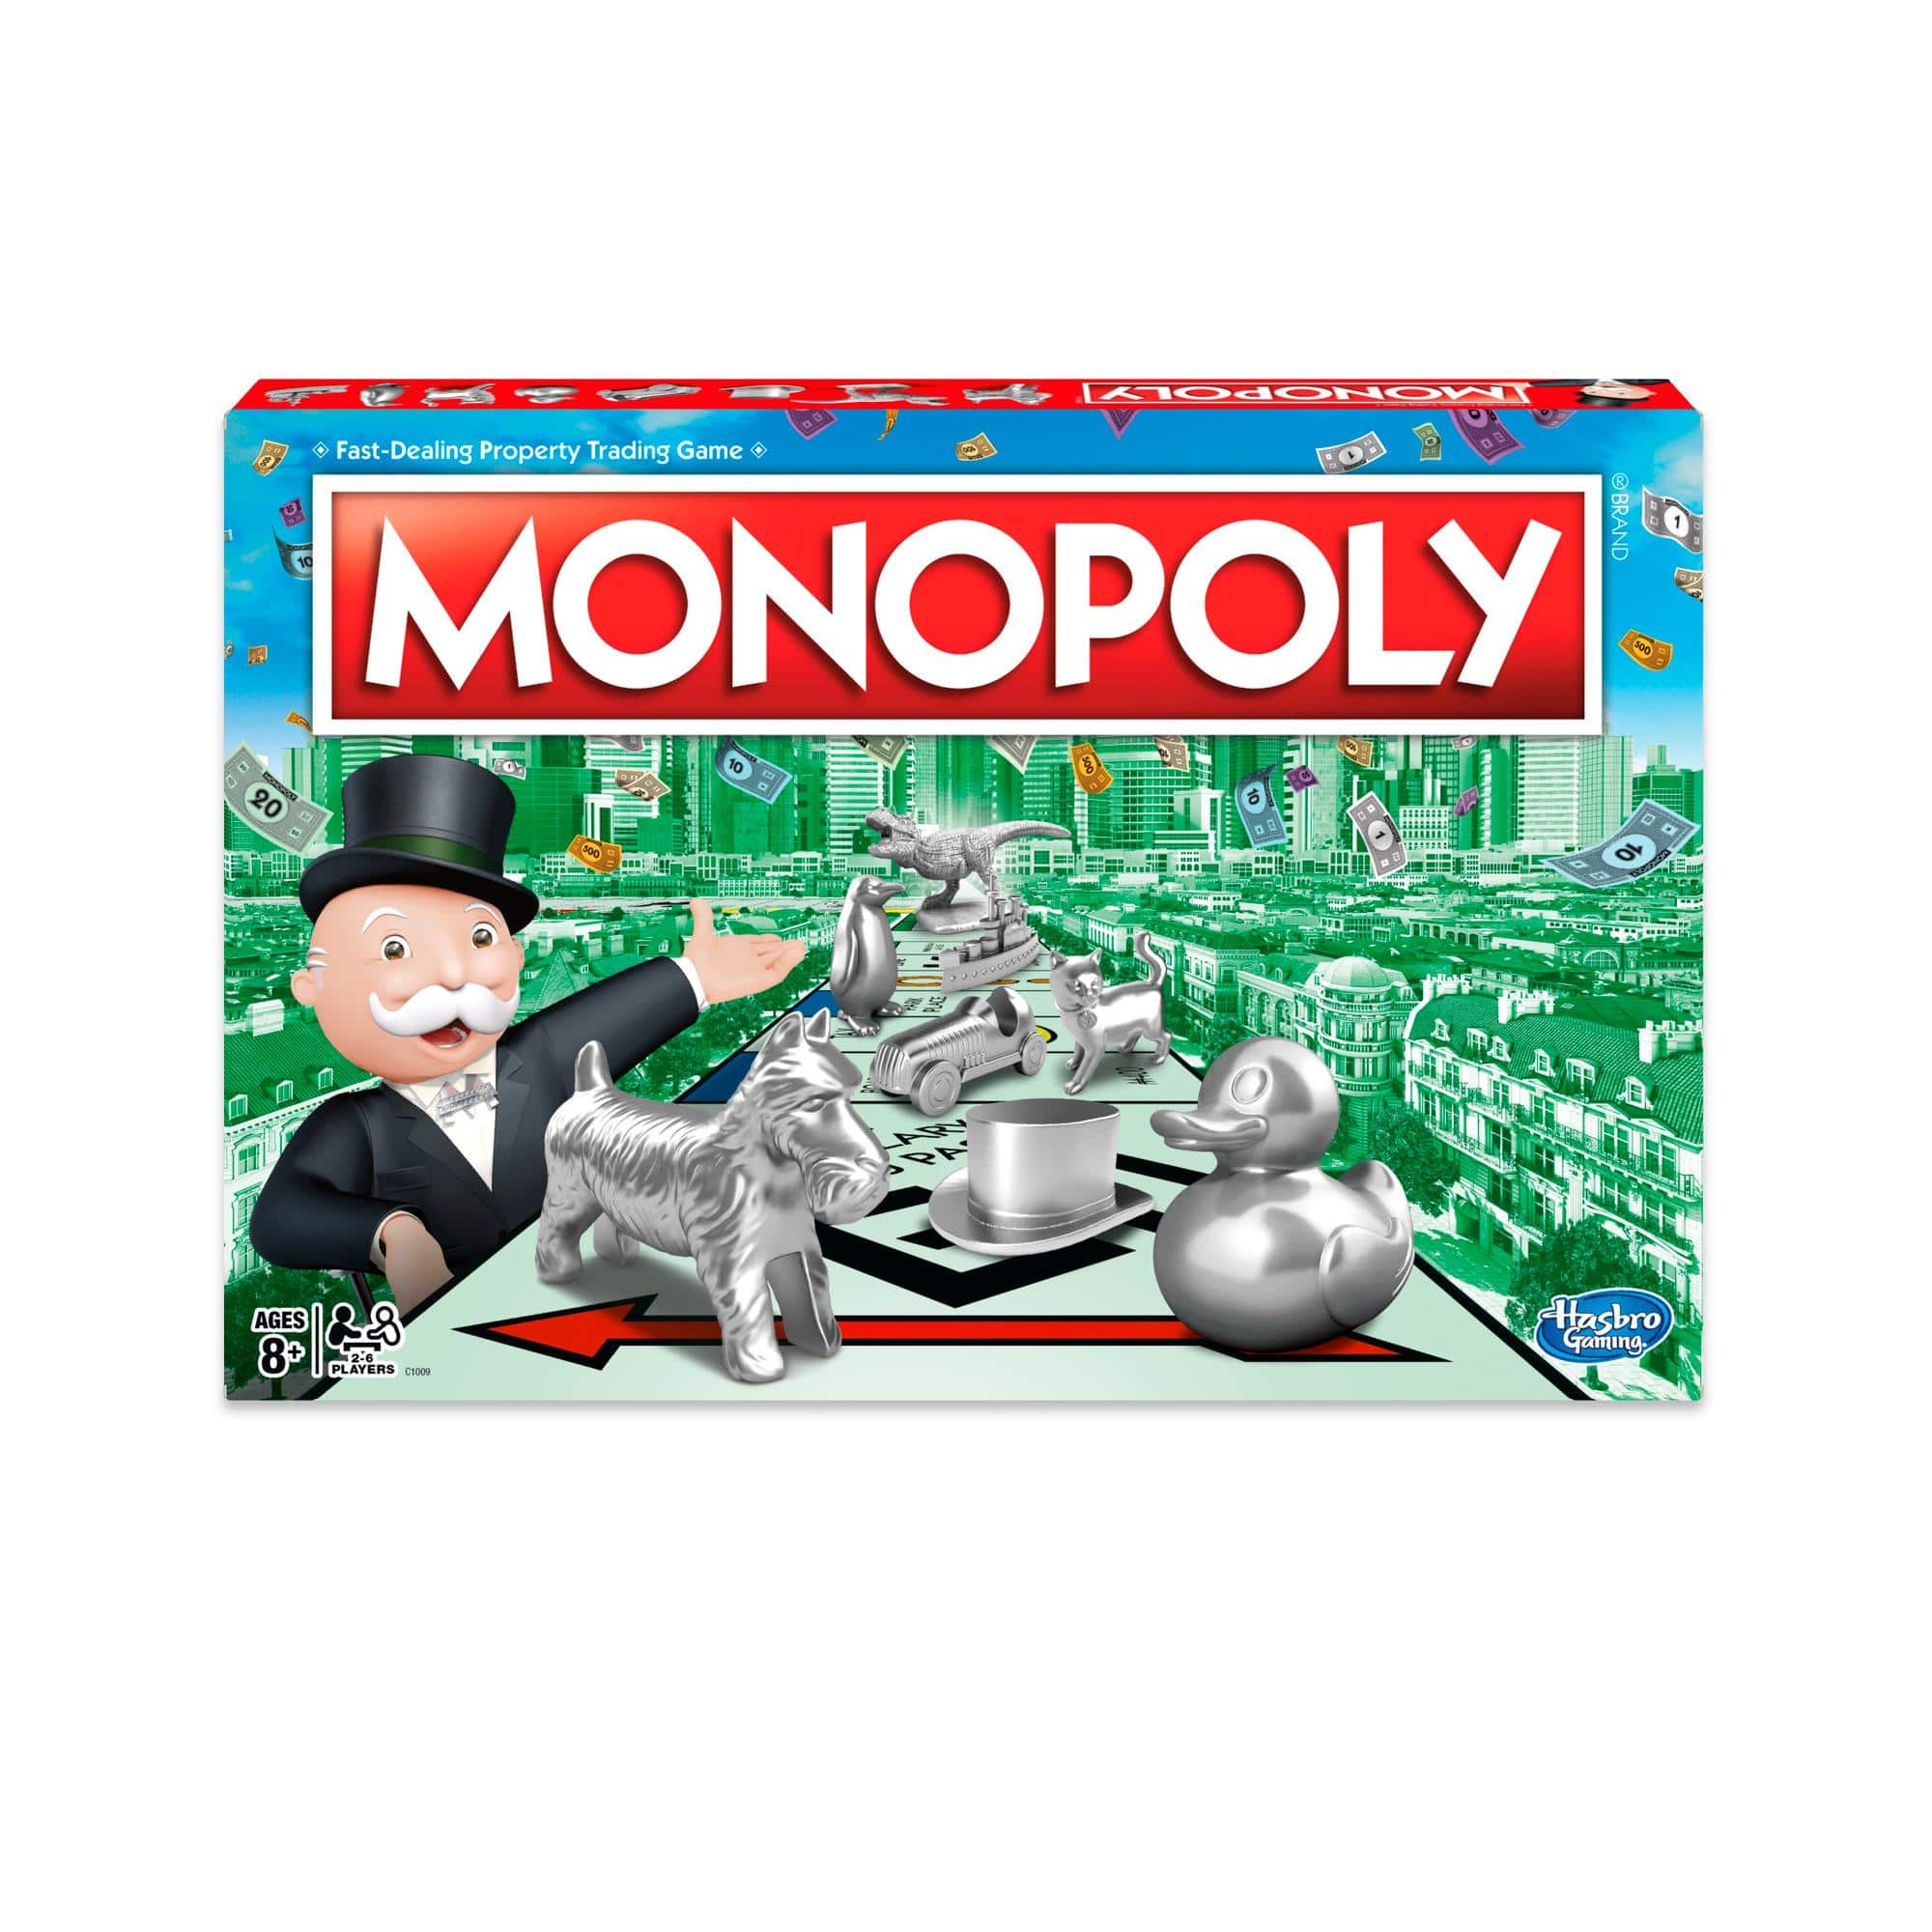 Player figures from Monopoly will come to Fortnite as back blings